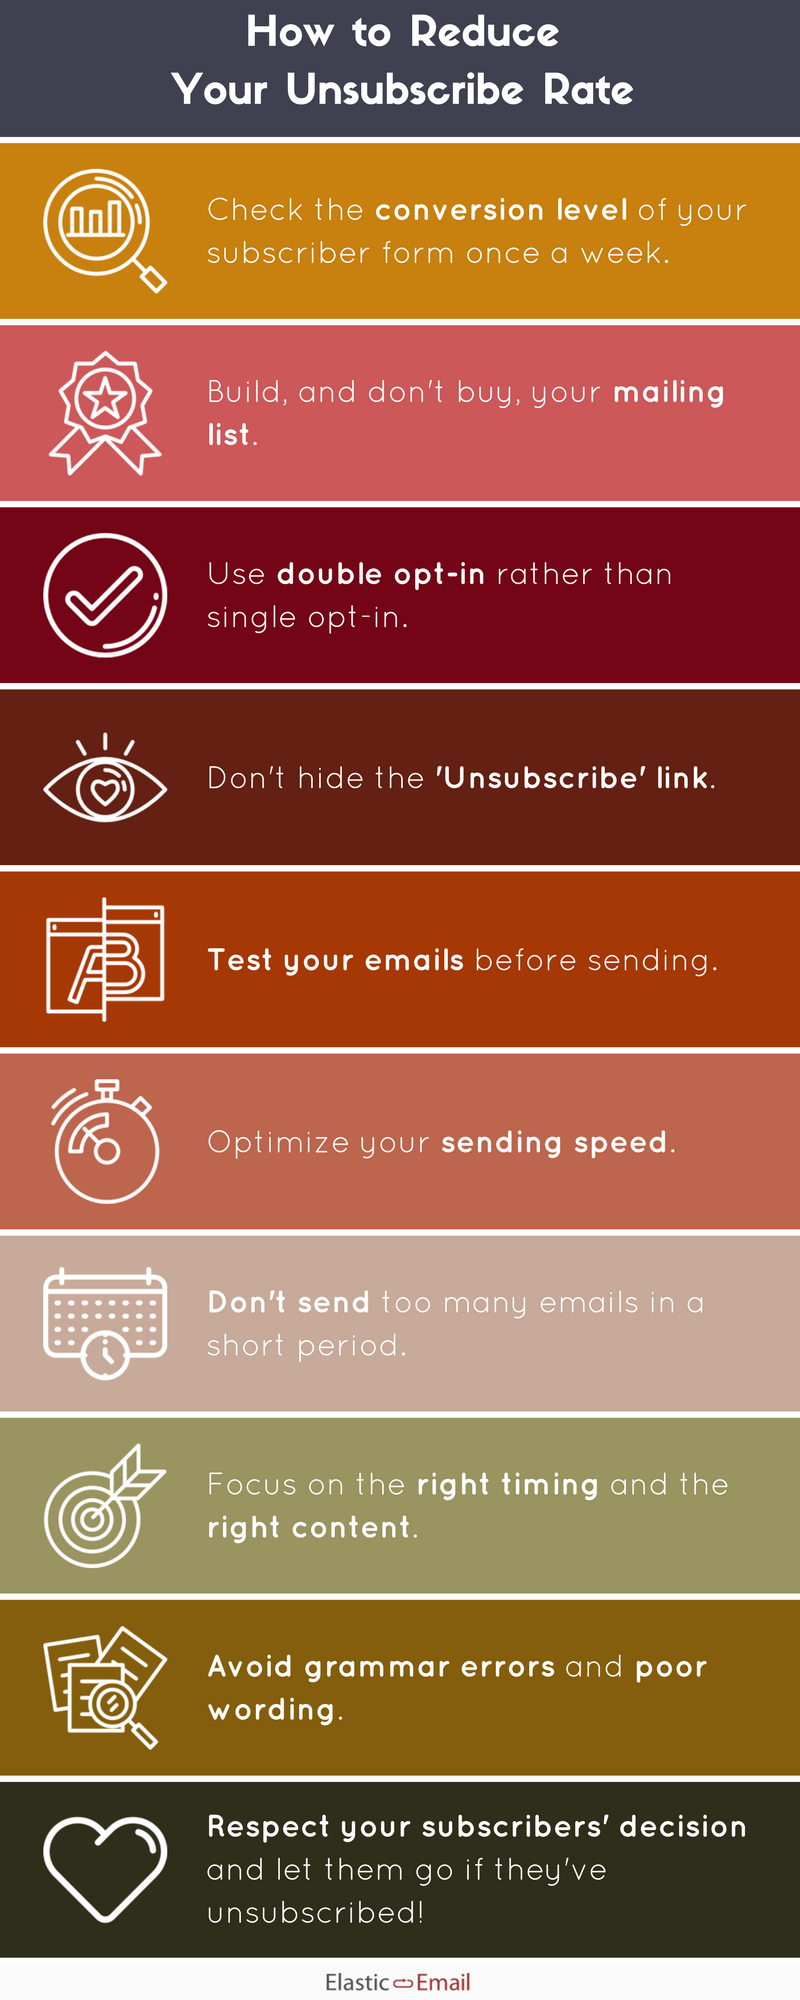 How to Reduce Your Unsubscribe Rate